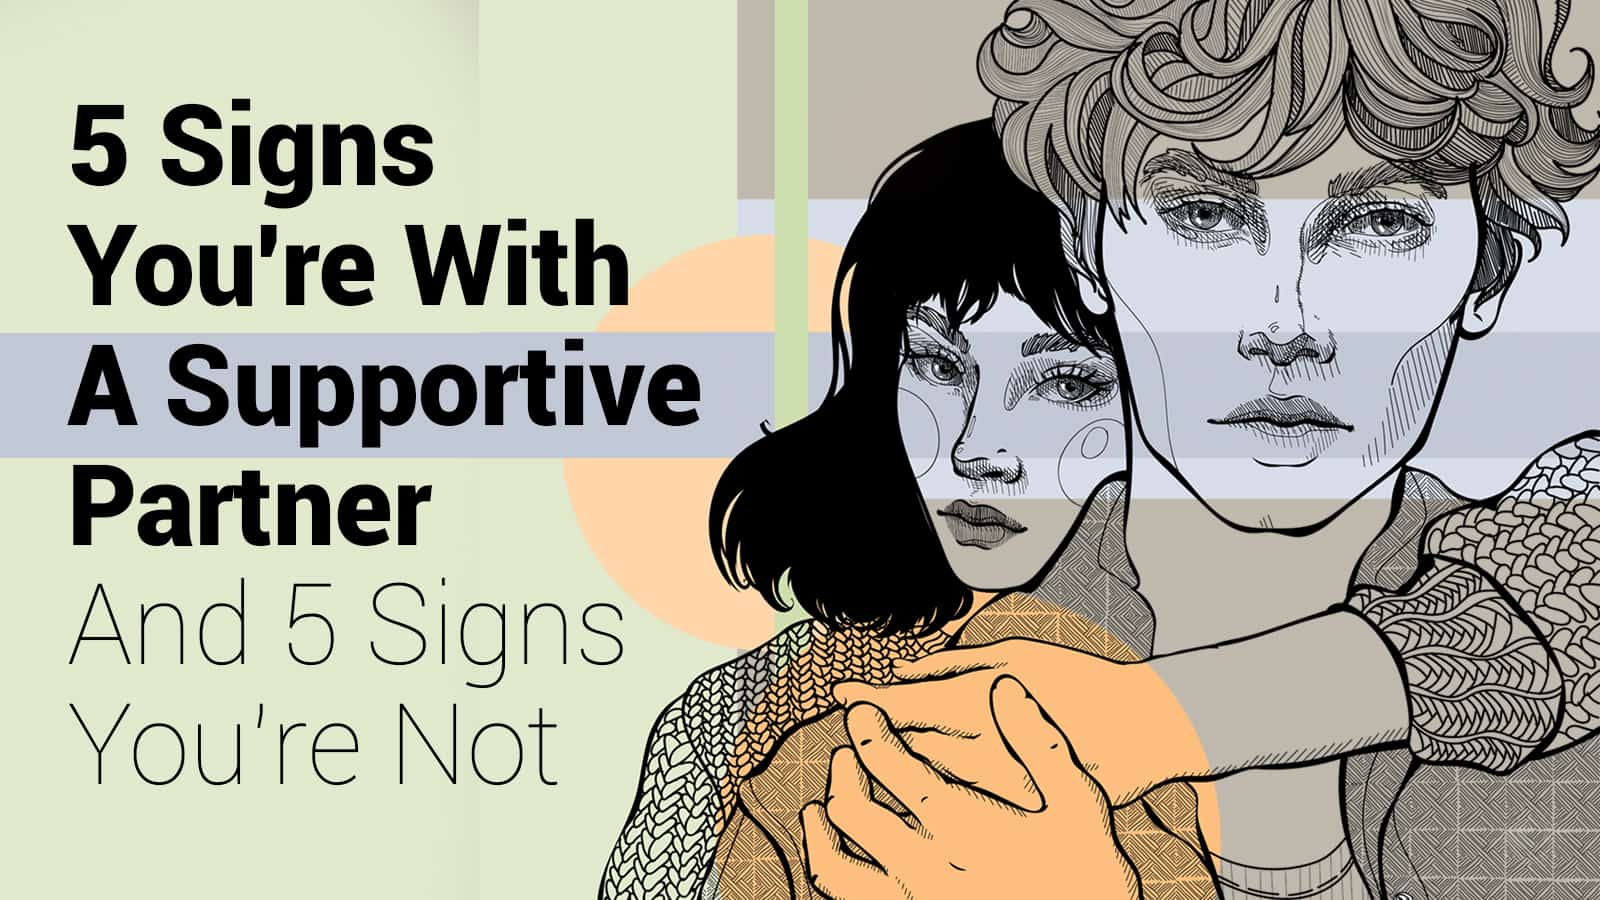 5 Signs You’re With A Supportive Partner (And 5 Signs You’re Not)